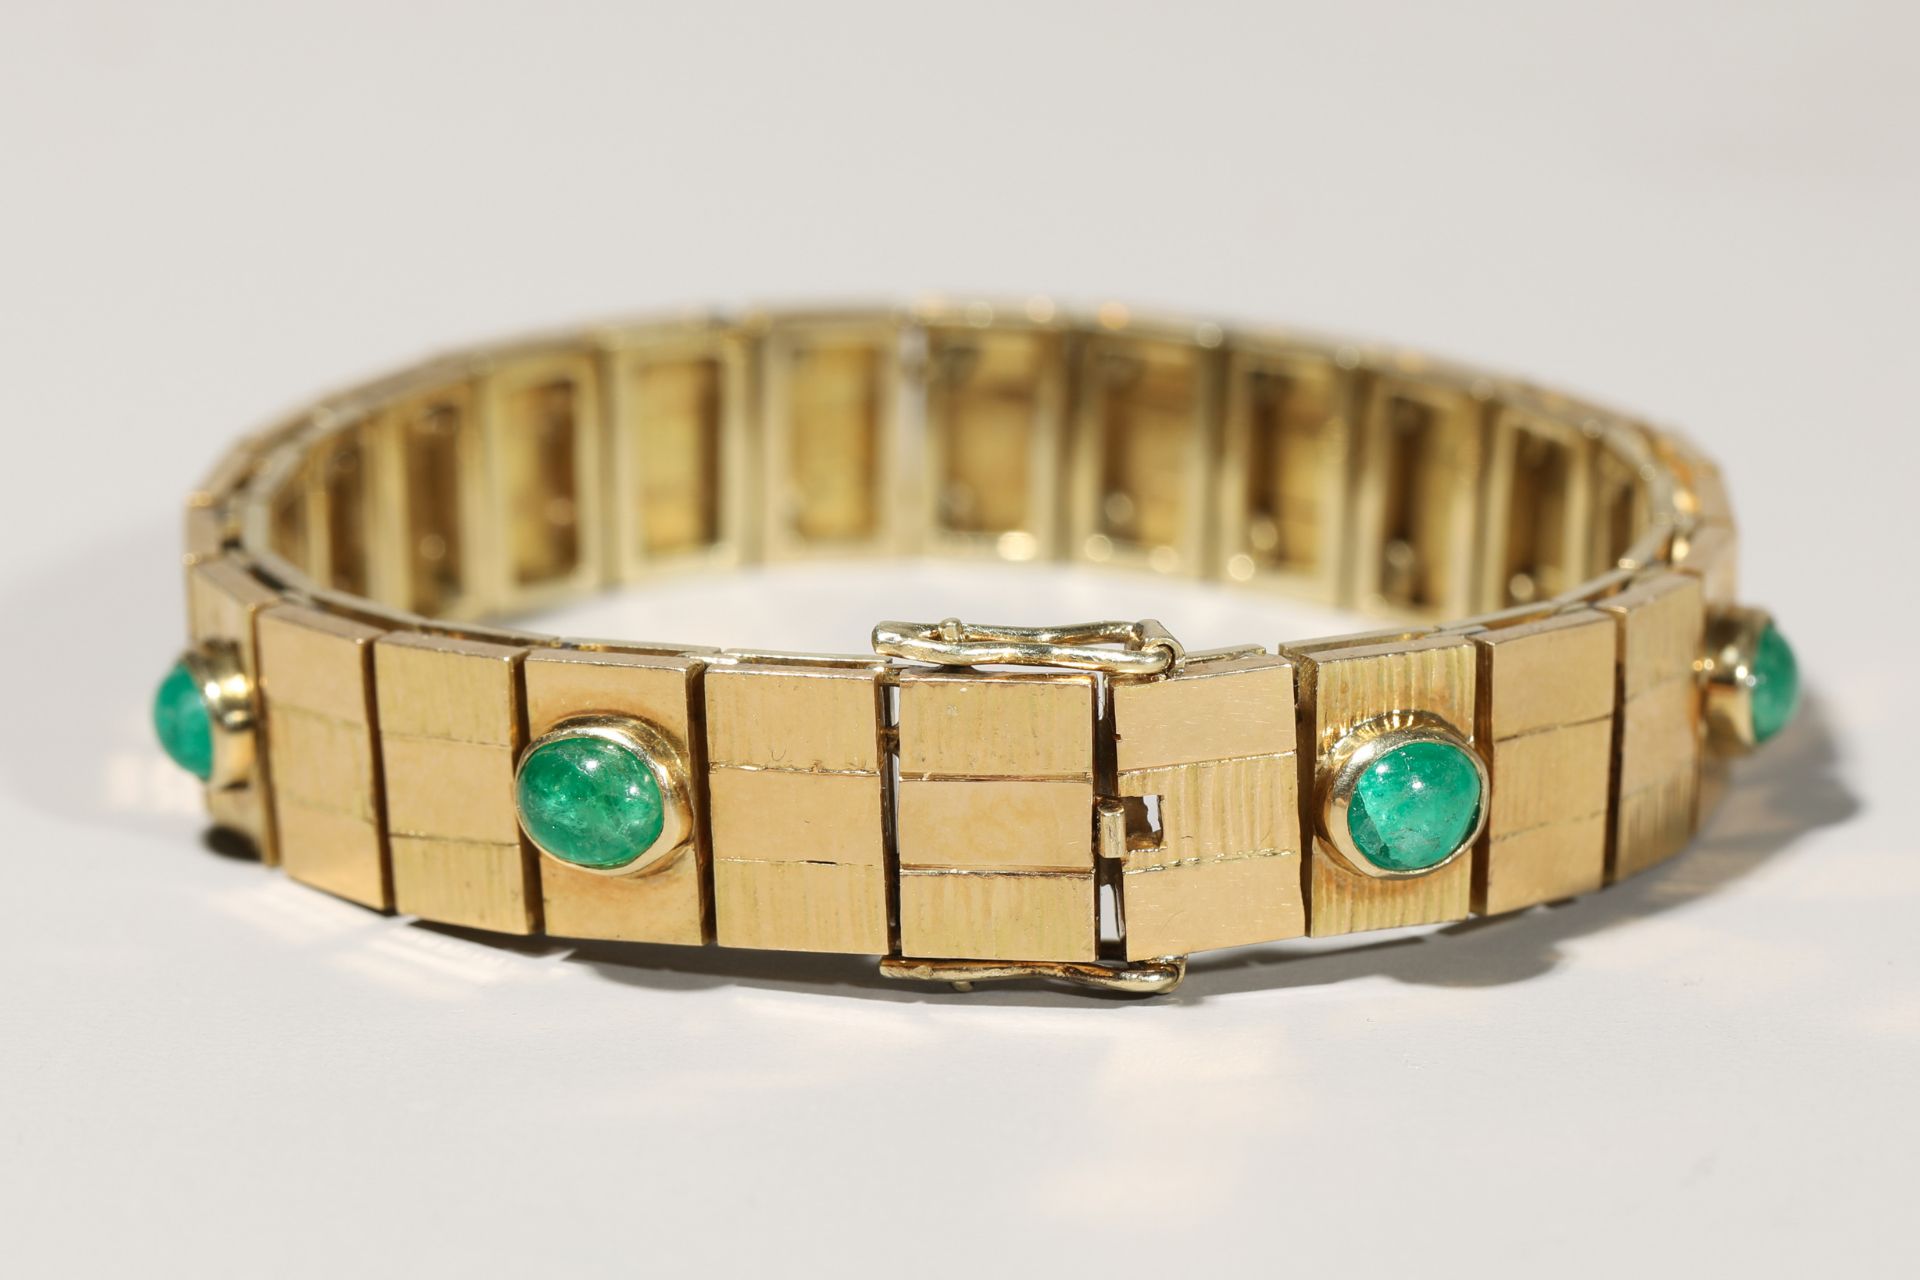 Gold bracelet with emerald cabochons - Image 5 of 7